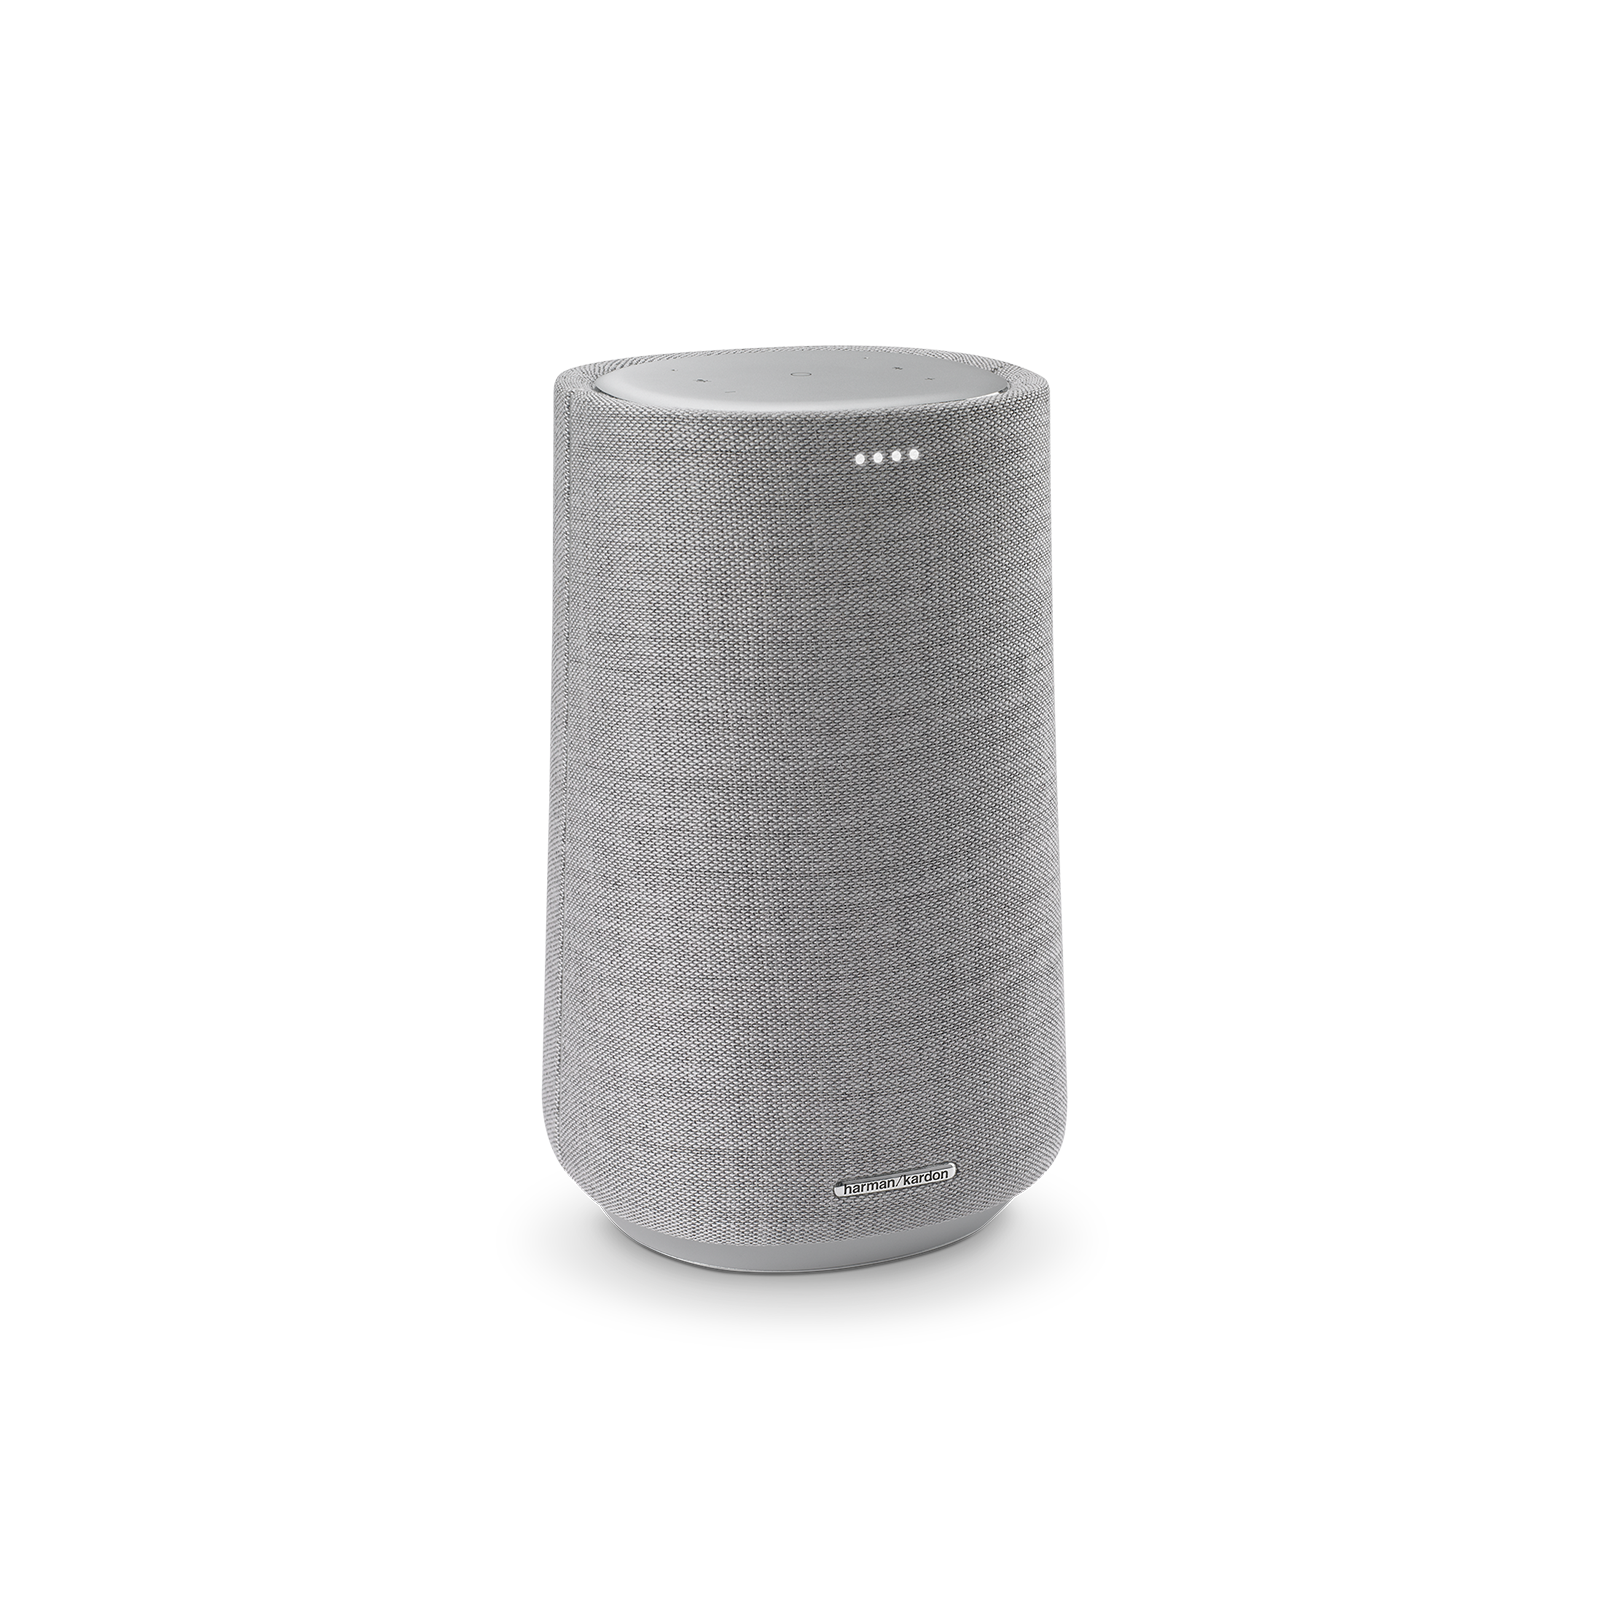 Harman Kardon Citation 100 MKII - Grey - Bring rich wireless sound to any space with the smart and compact Harman Kardon Citation 100 mkII. Its innovative features include AirPlay, Chromecast built-in and the Google Assistant. - Hero